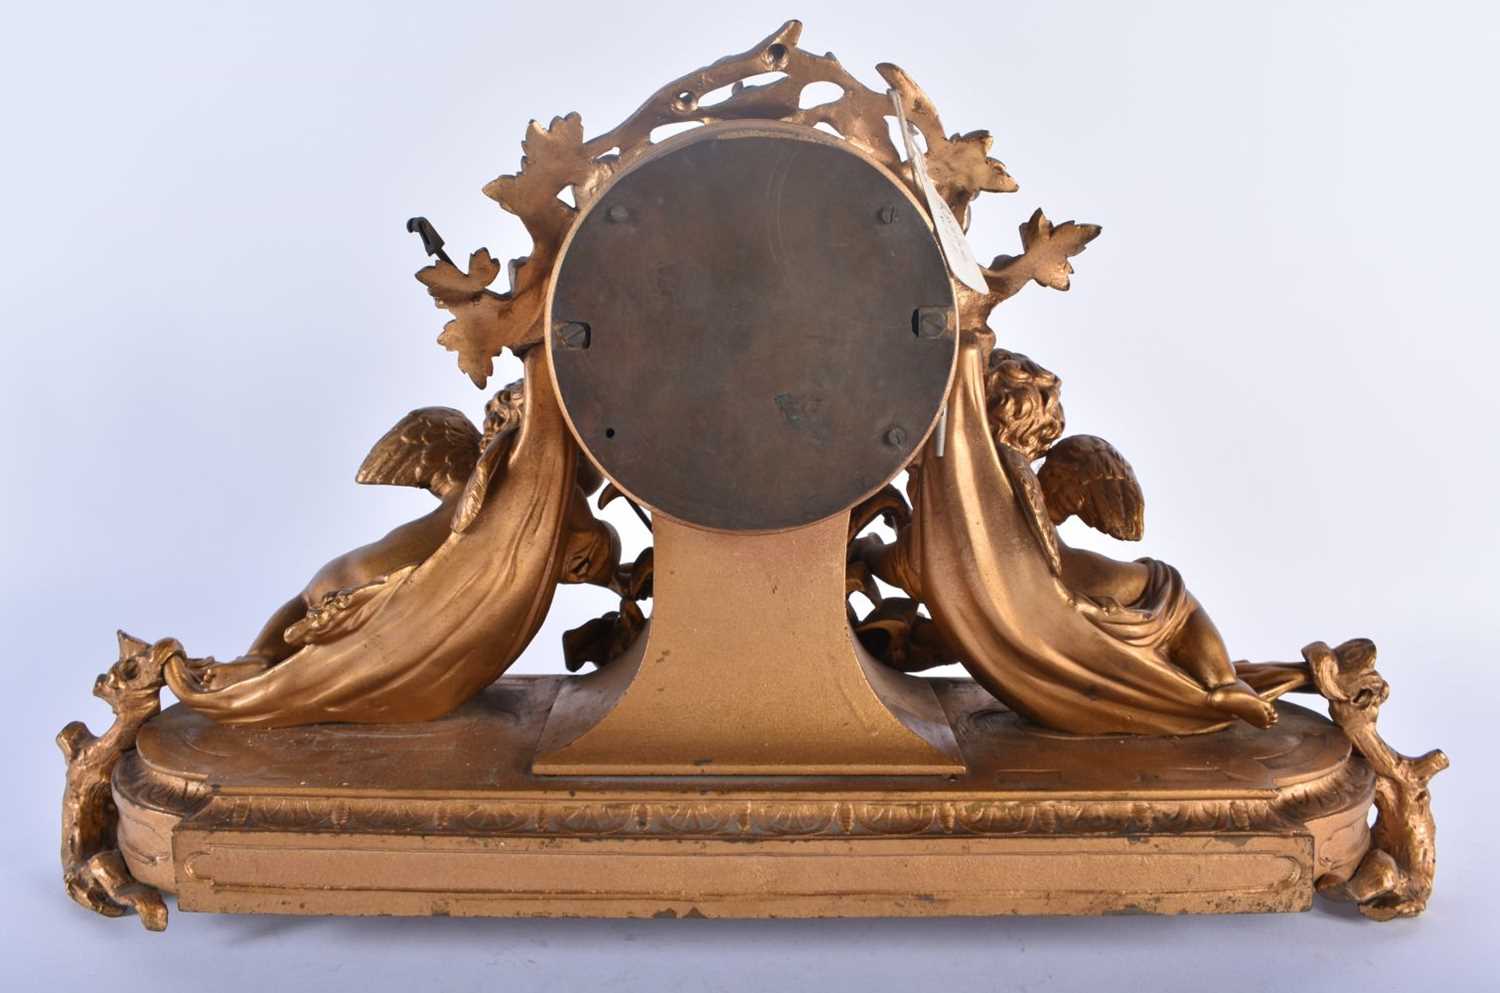 A LARGE 19TH CENTURY FRENCH BRONZE MANTEL CLOCK formed with a central drum encased by two putti. - Image 5 of 7